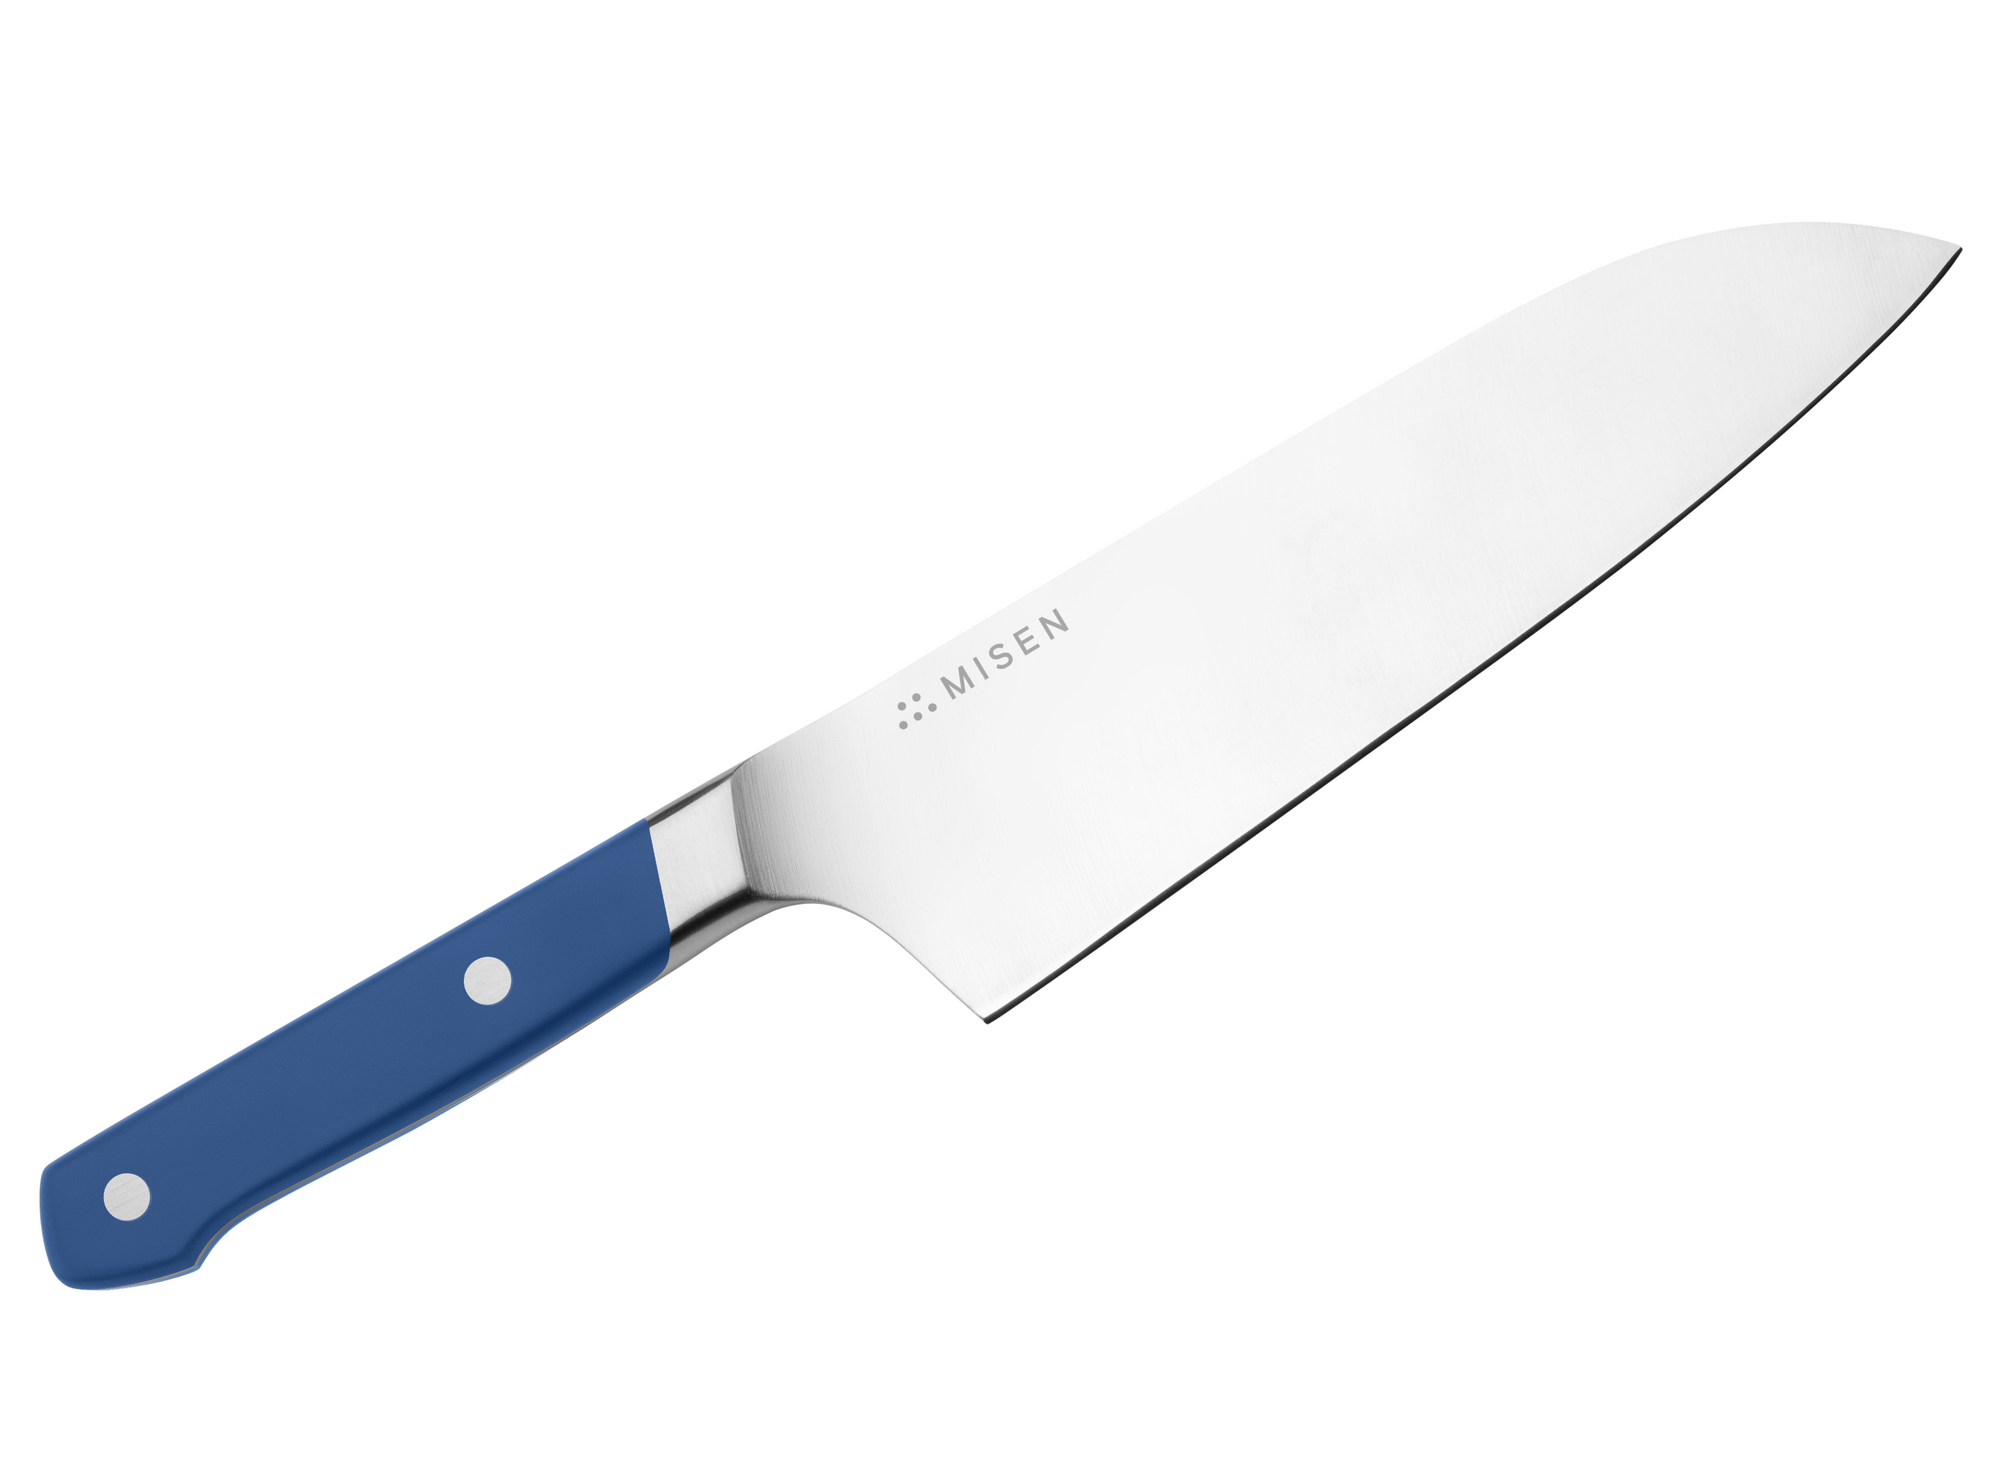 Top Uses for a Santoku Knife in the Kitchen